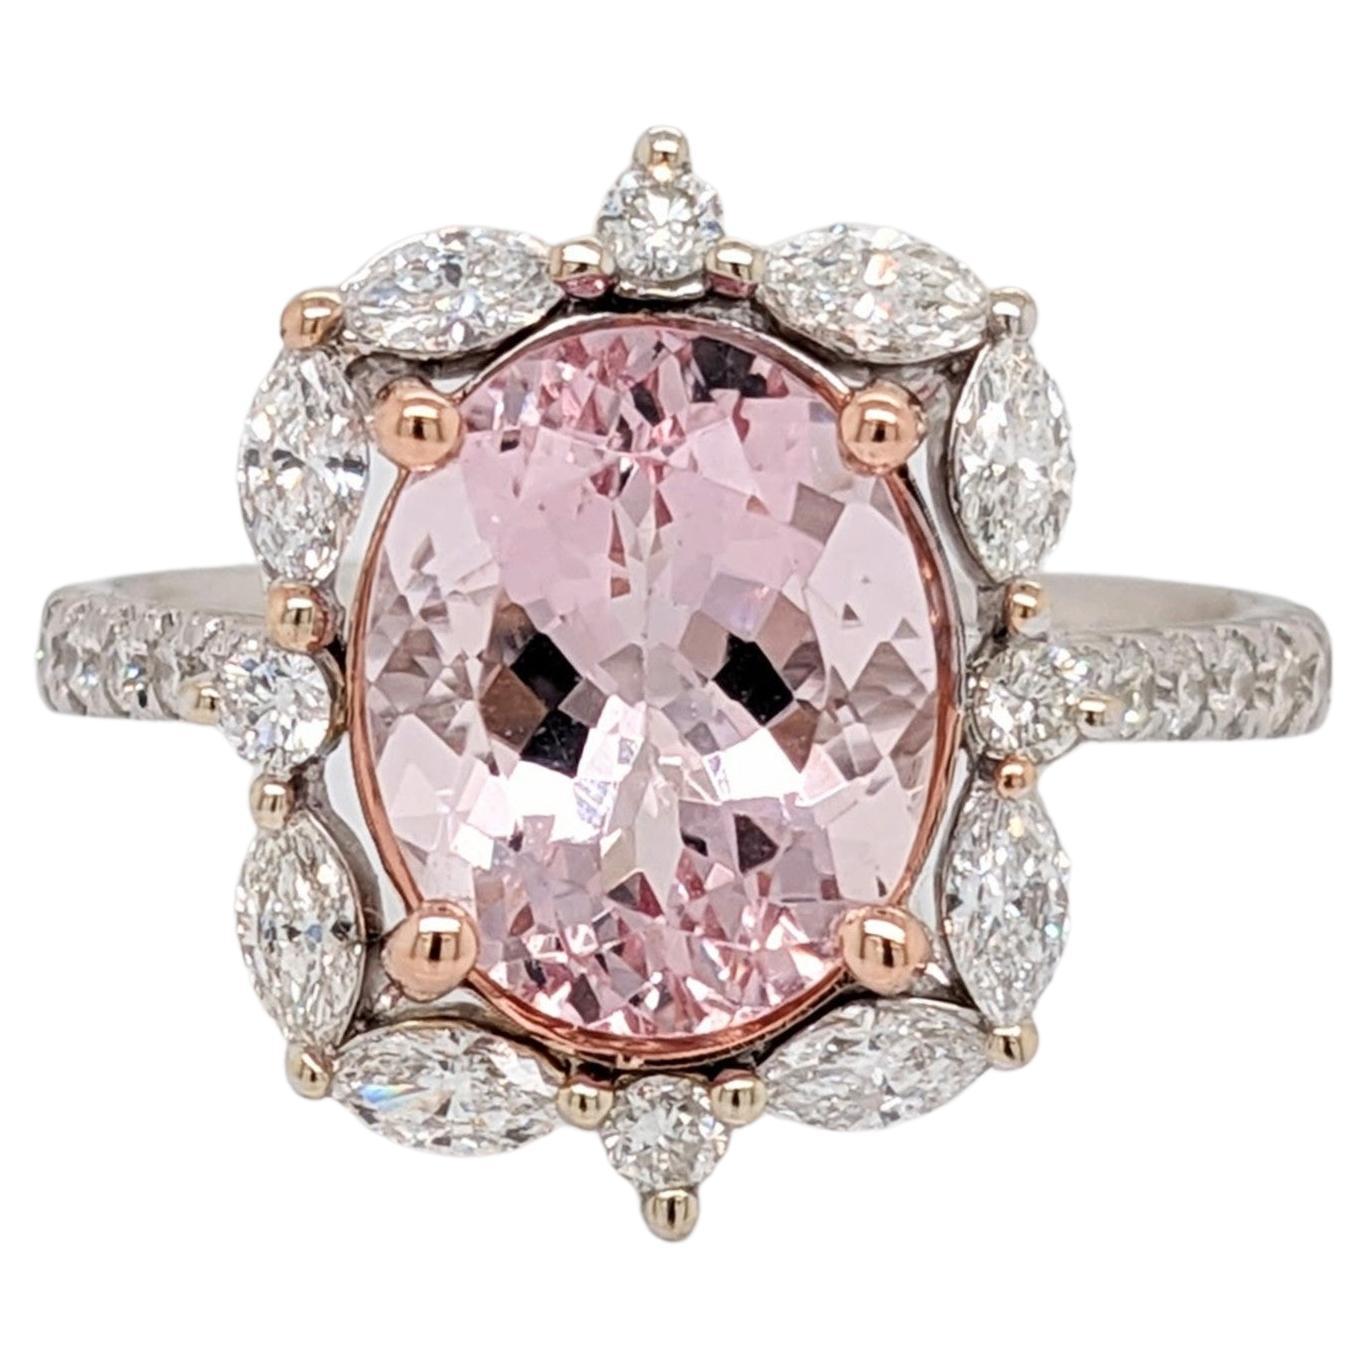 3 ct Pink Morganite and Diamond Ring in Solid 14K Dual White/Rose Gold Oval 11x9